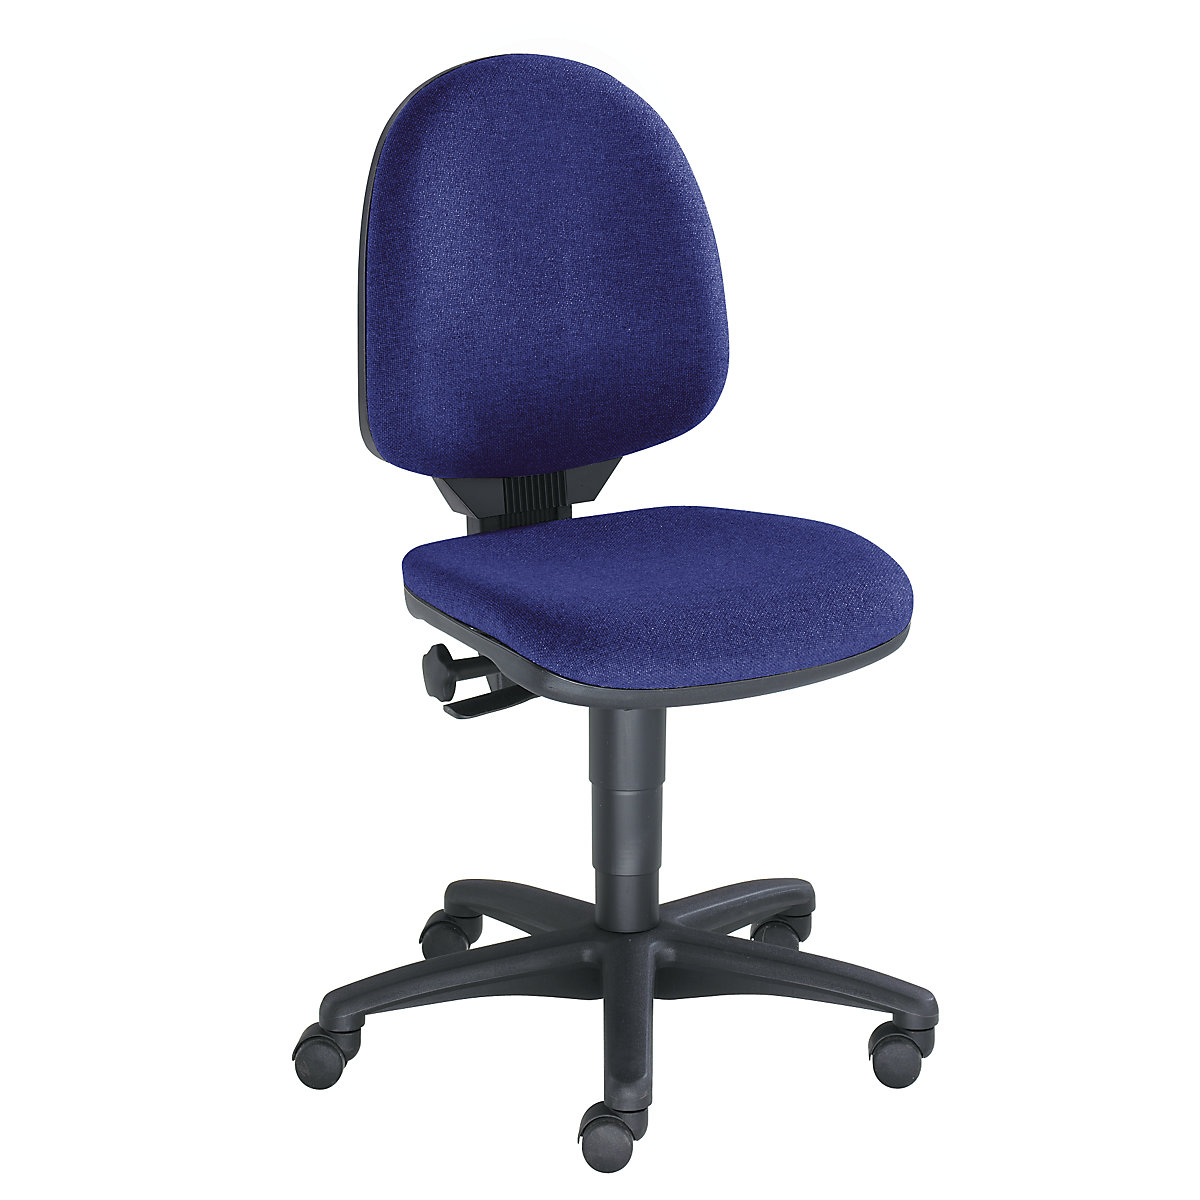 Standard swivel chair – Topstar, without arm rests, back rest 450 mm, fabric covering blue, frame black, 2+-5